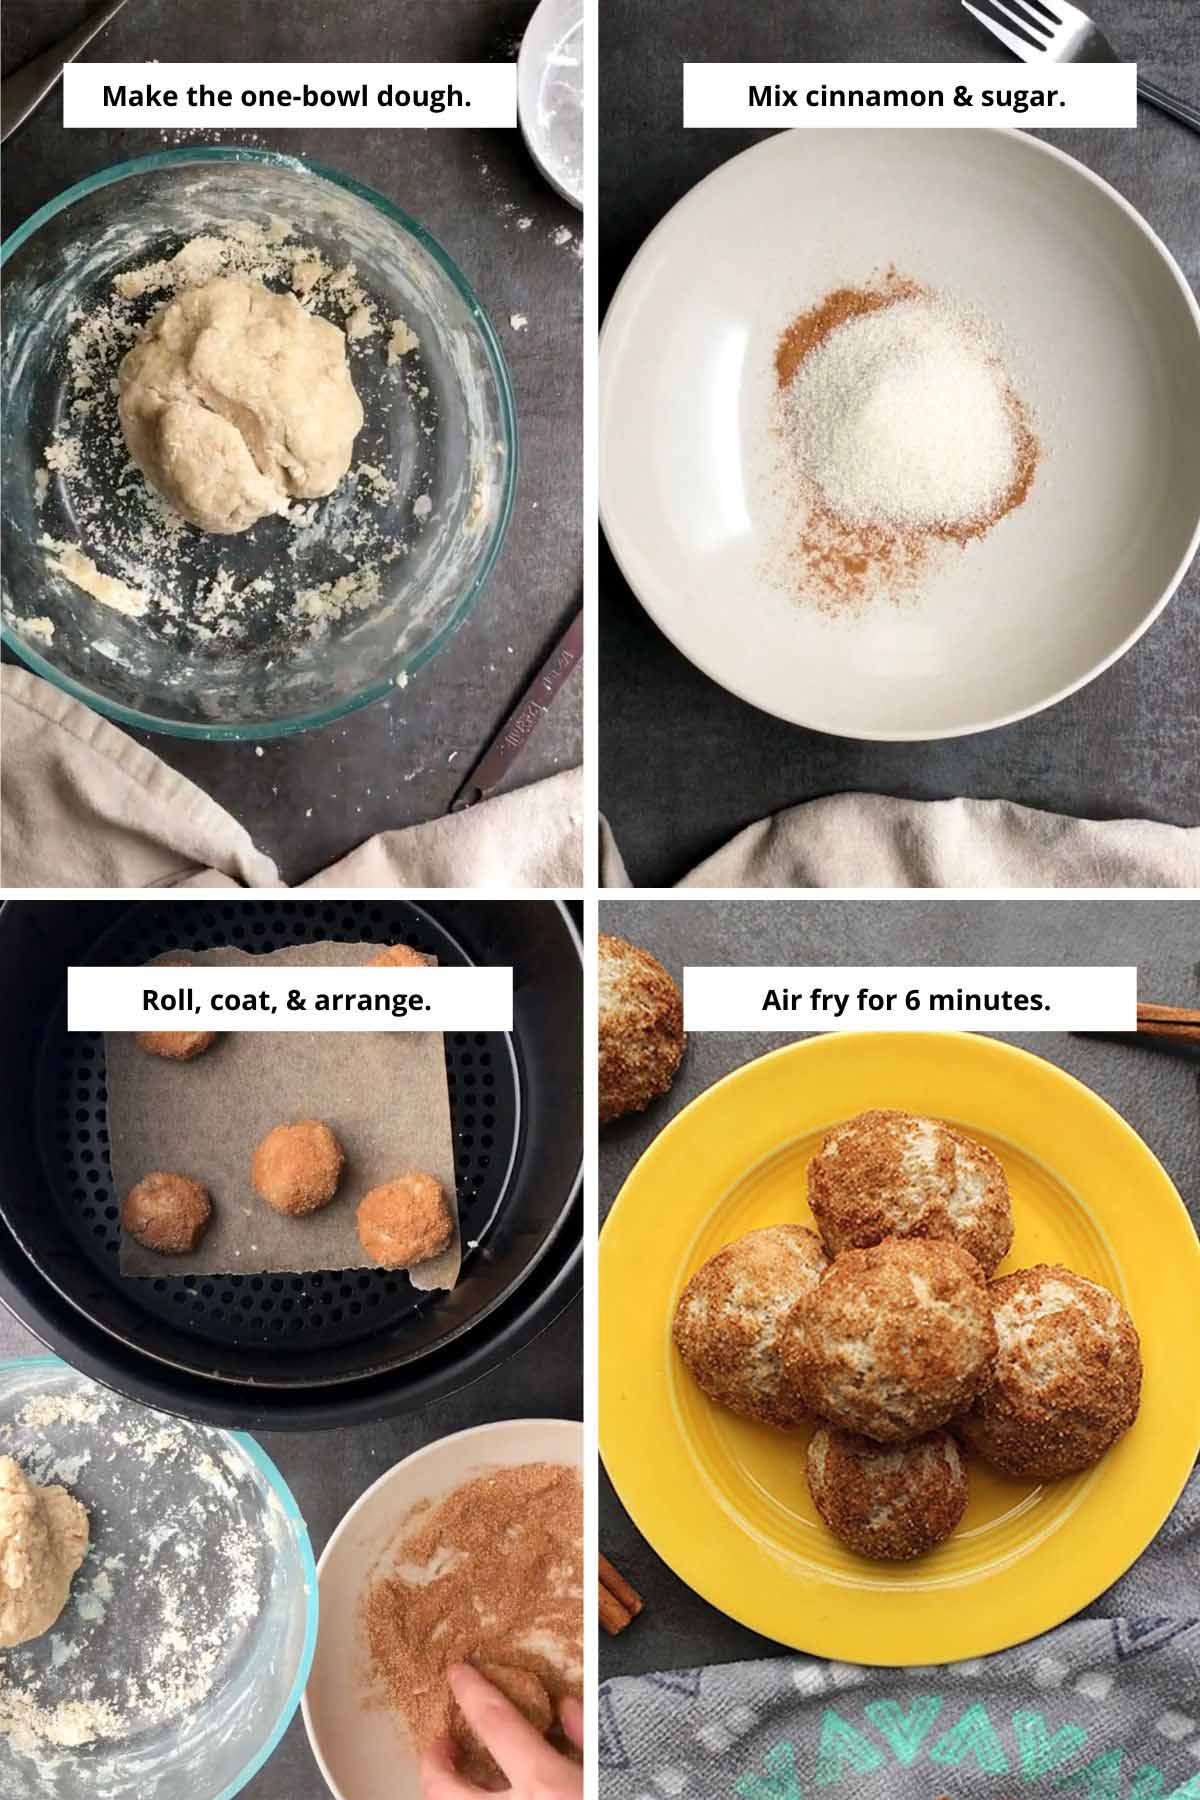 image collage showing the dough in the mixing bowl, the cinnamon and sugar in a small bowl, rolling the dough balls in cinnamon sugar, and the finished doughnut holes on a plate